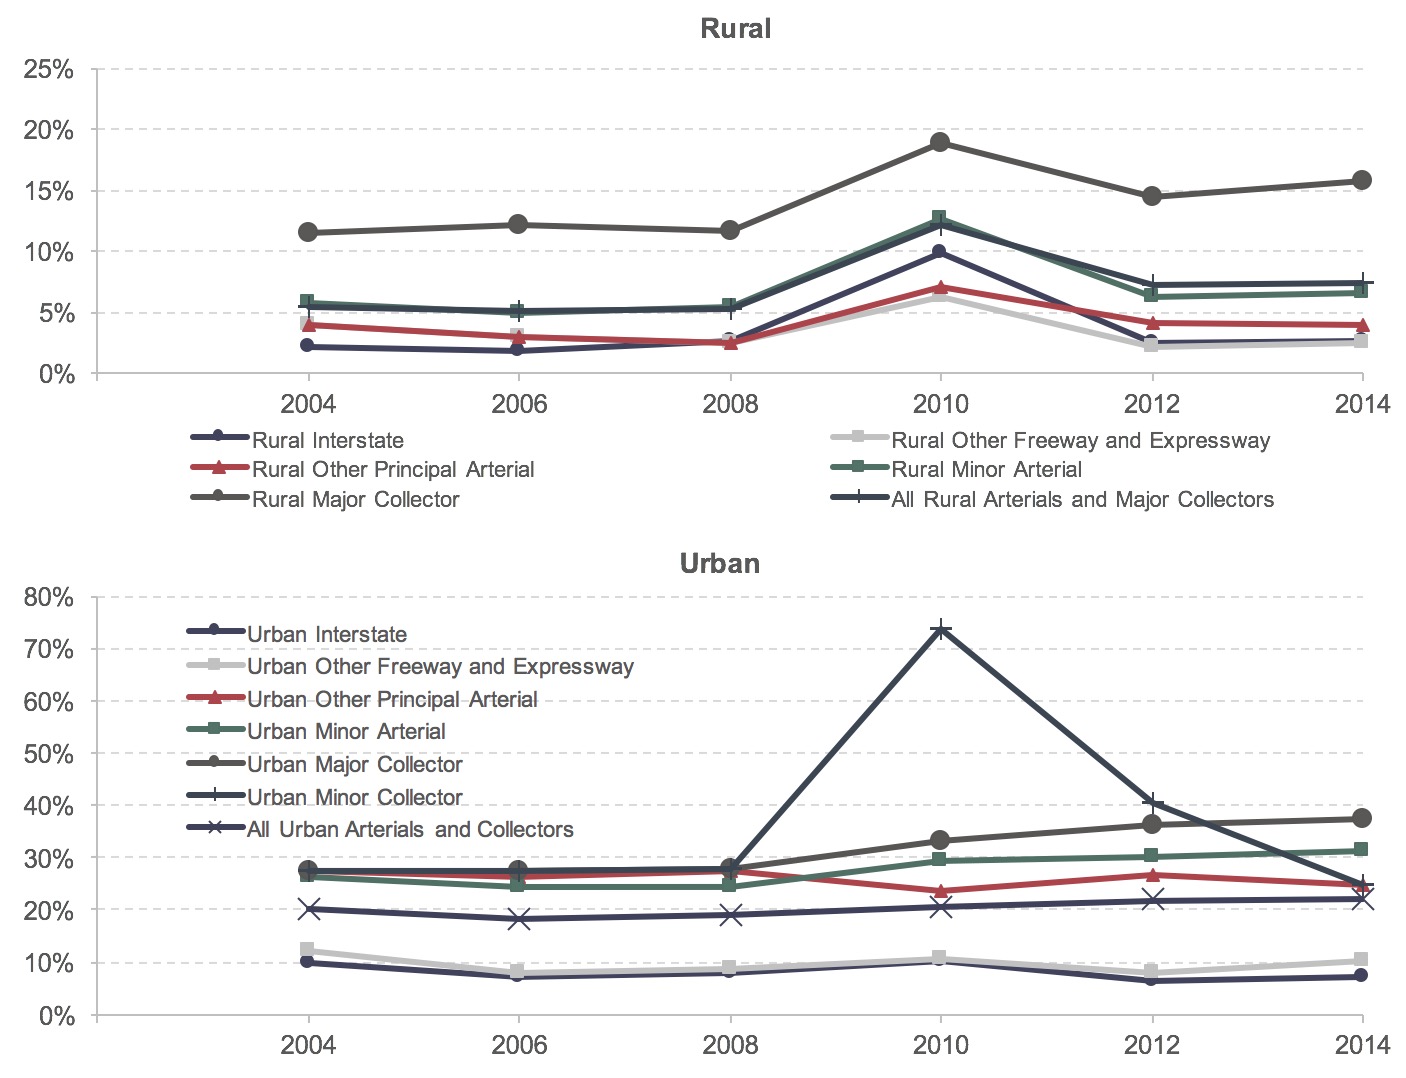 Two different line plots show the percentage of pavement ride quality rated poor for seven functional classes of roads; one chart is for rural roads and the other is for urban. For rural roads, trends in pavement ride quality are generally slightly positive. All time series start in 2004 and end in 2014. Rural Interstate ride quality percentage began at 2.2 and increased to 2.6, rural other principal arterial began at 3.9 and ended at 3.9, rural major collector began at 11.5 and increased to 15.7, rural other freeway and expressway started at 3.9 and decreased to 2.4, rural minor arterials started at 5.7 and increased to 6.6, and all rural arterials and major collectors started at 5.5 and increased to 7.4. Urban Interstate ride quality percentage began at 9.7 and decreased to 7.2, urban other principal arterial began at 27.4 and decreased to 24.8, urban major collector began at 27.4 and increased to 37.5, urban other freeway and expressway started at 12.3 and decreased to 10.1, urban minor arterials started at 26.2 and increased to 31.3, and all urban arterials and collectors started at 20.3 and increased to 22.1. Source: HPMS.